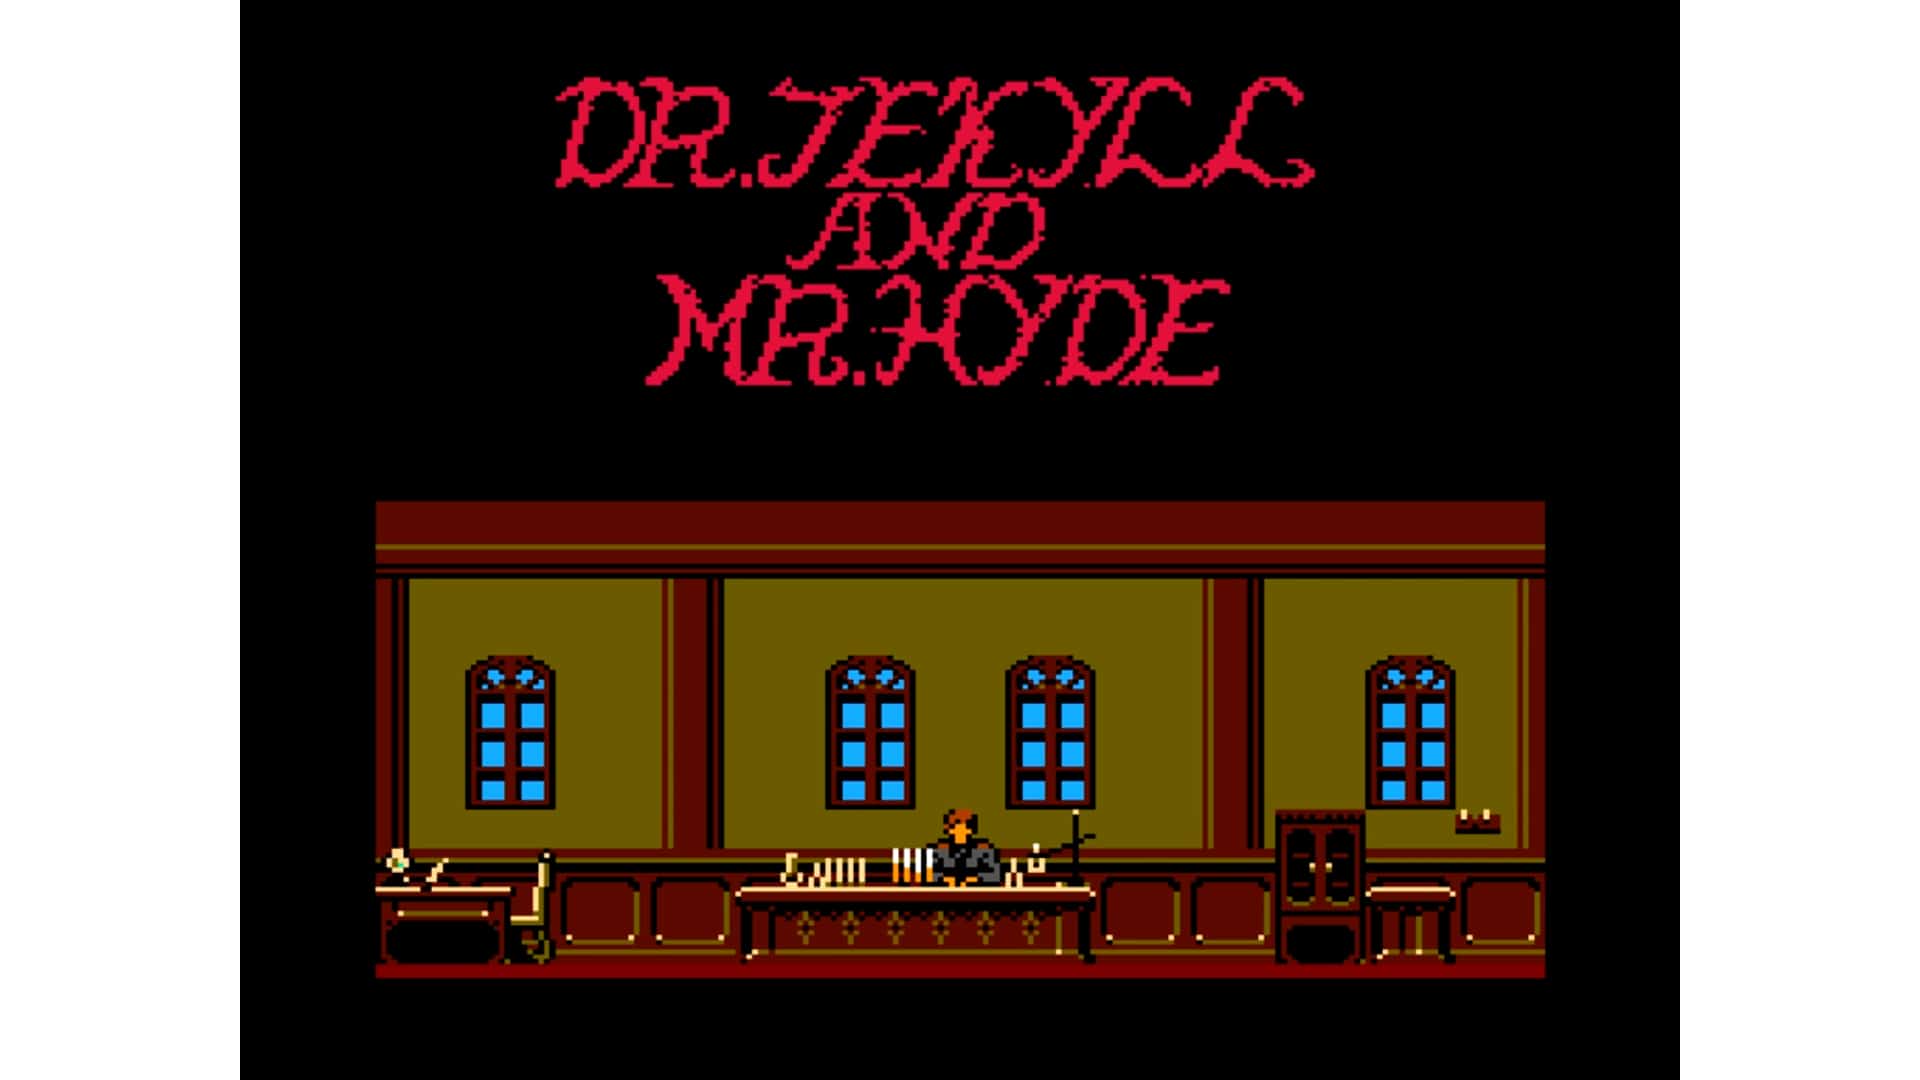 An in-game screenshot from Dr. Jekyll and Mr. Hyde.